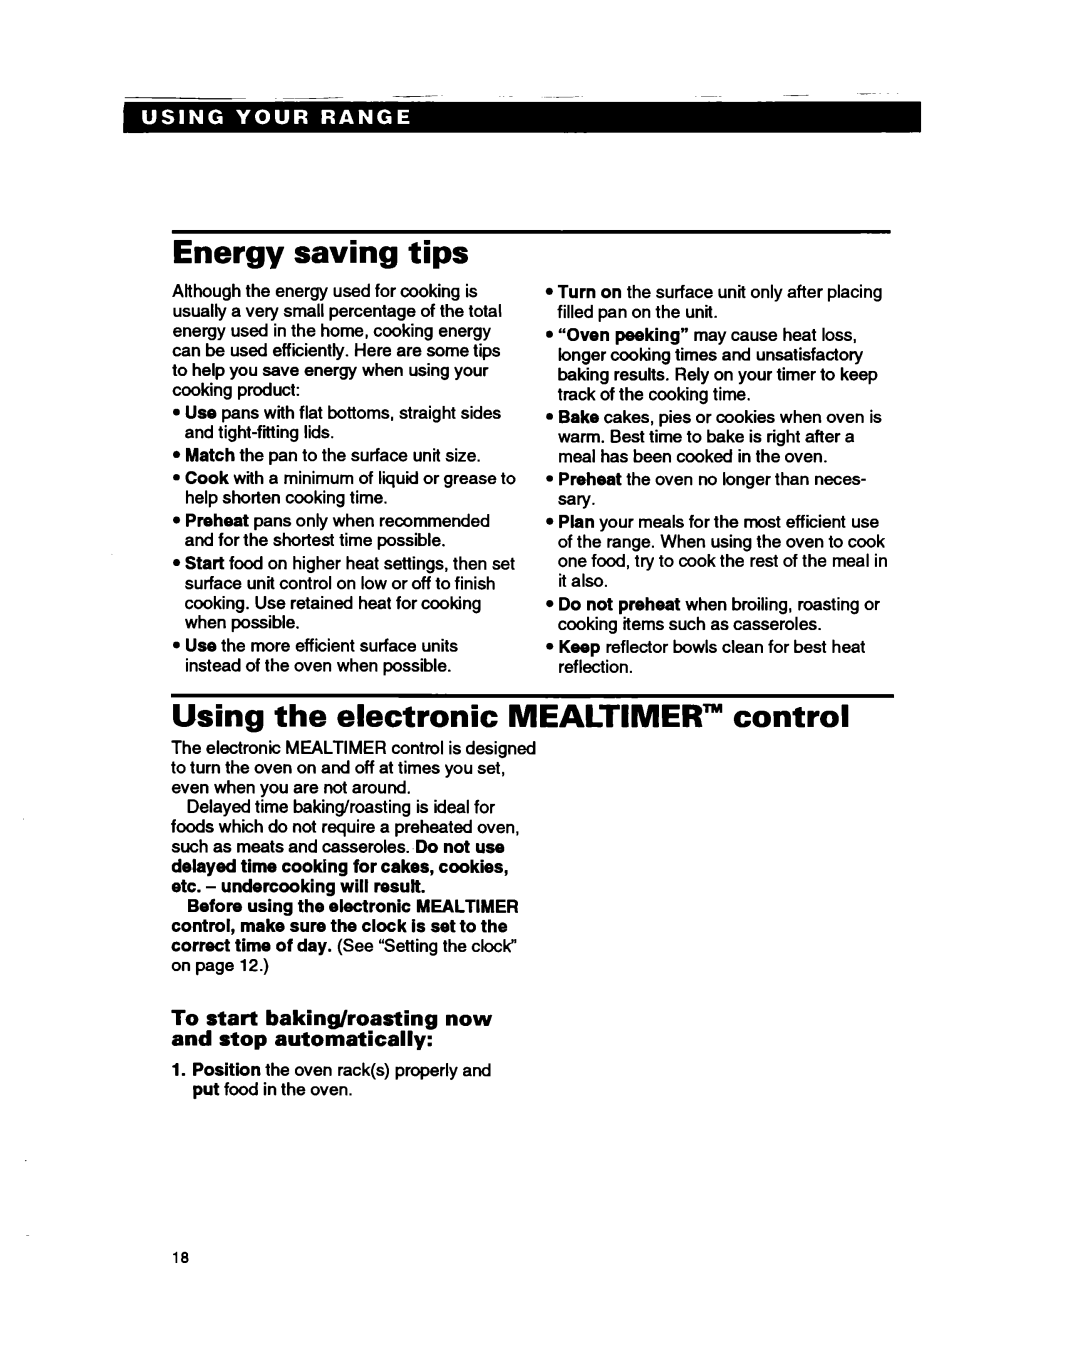 Whirlpool RS385PXB, RS385PCB manual Energy saving tips, Using the electronic MEALTIMER” control 